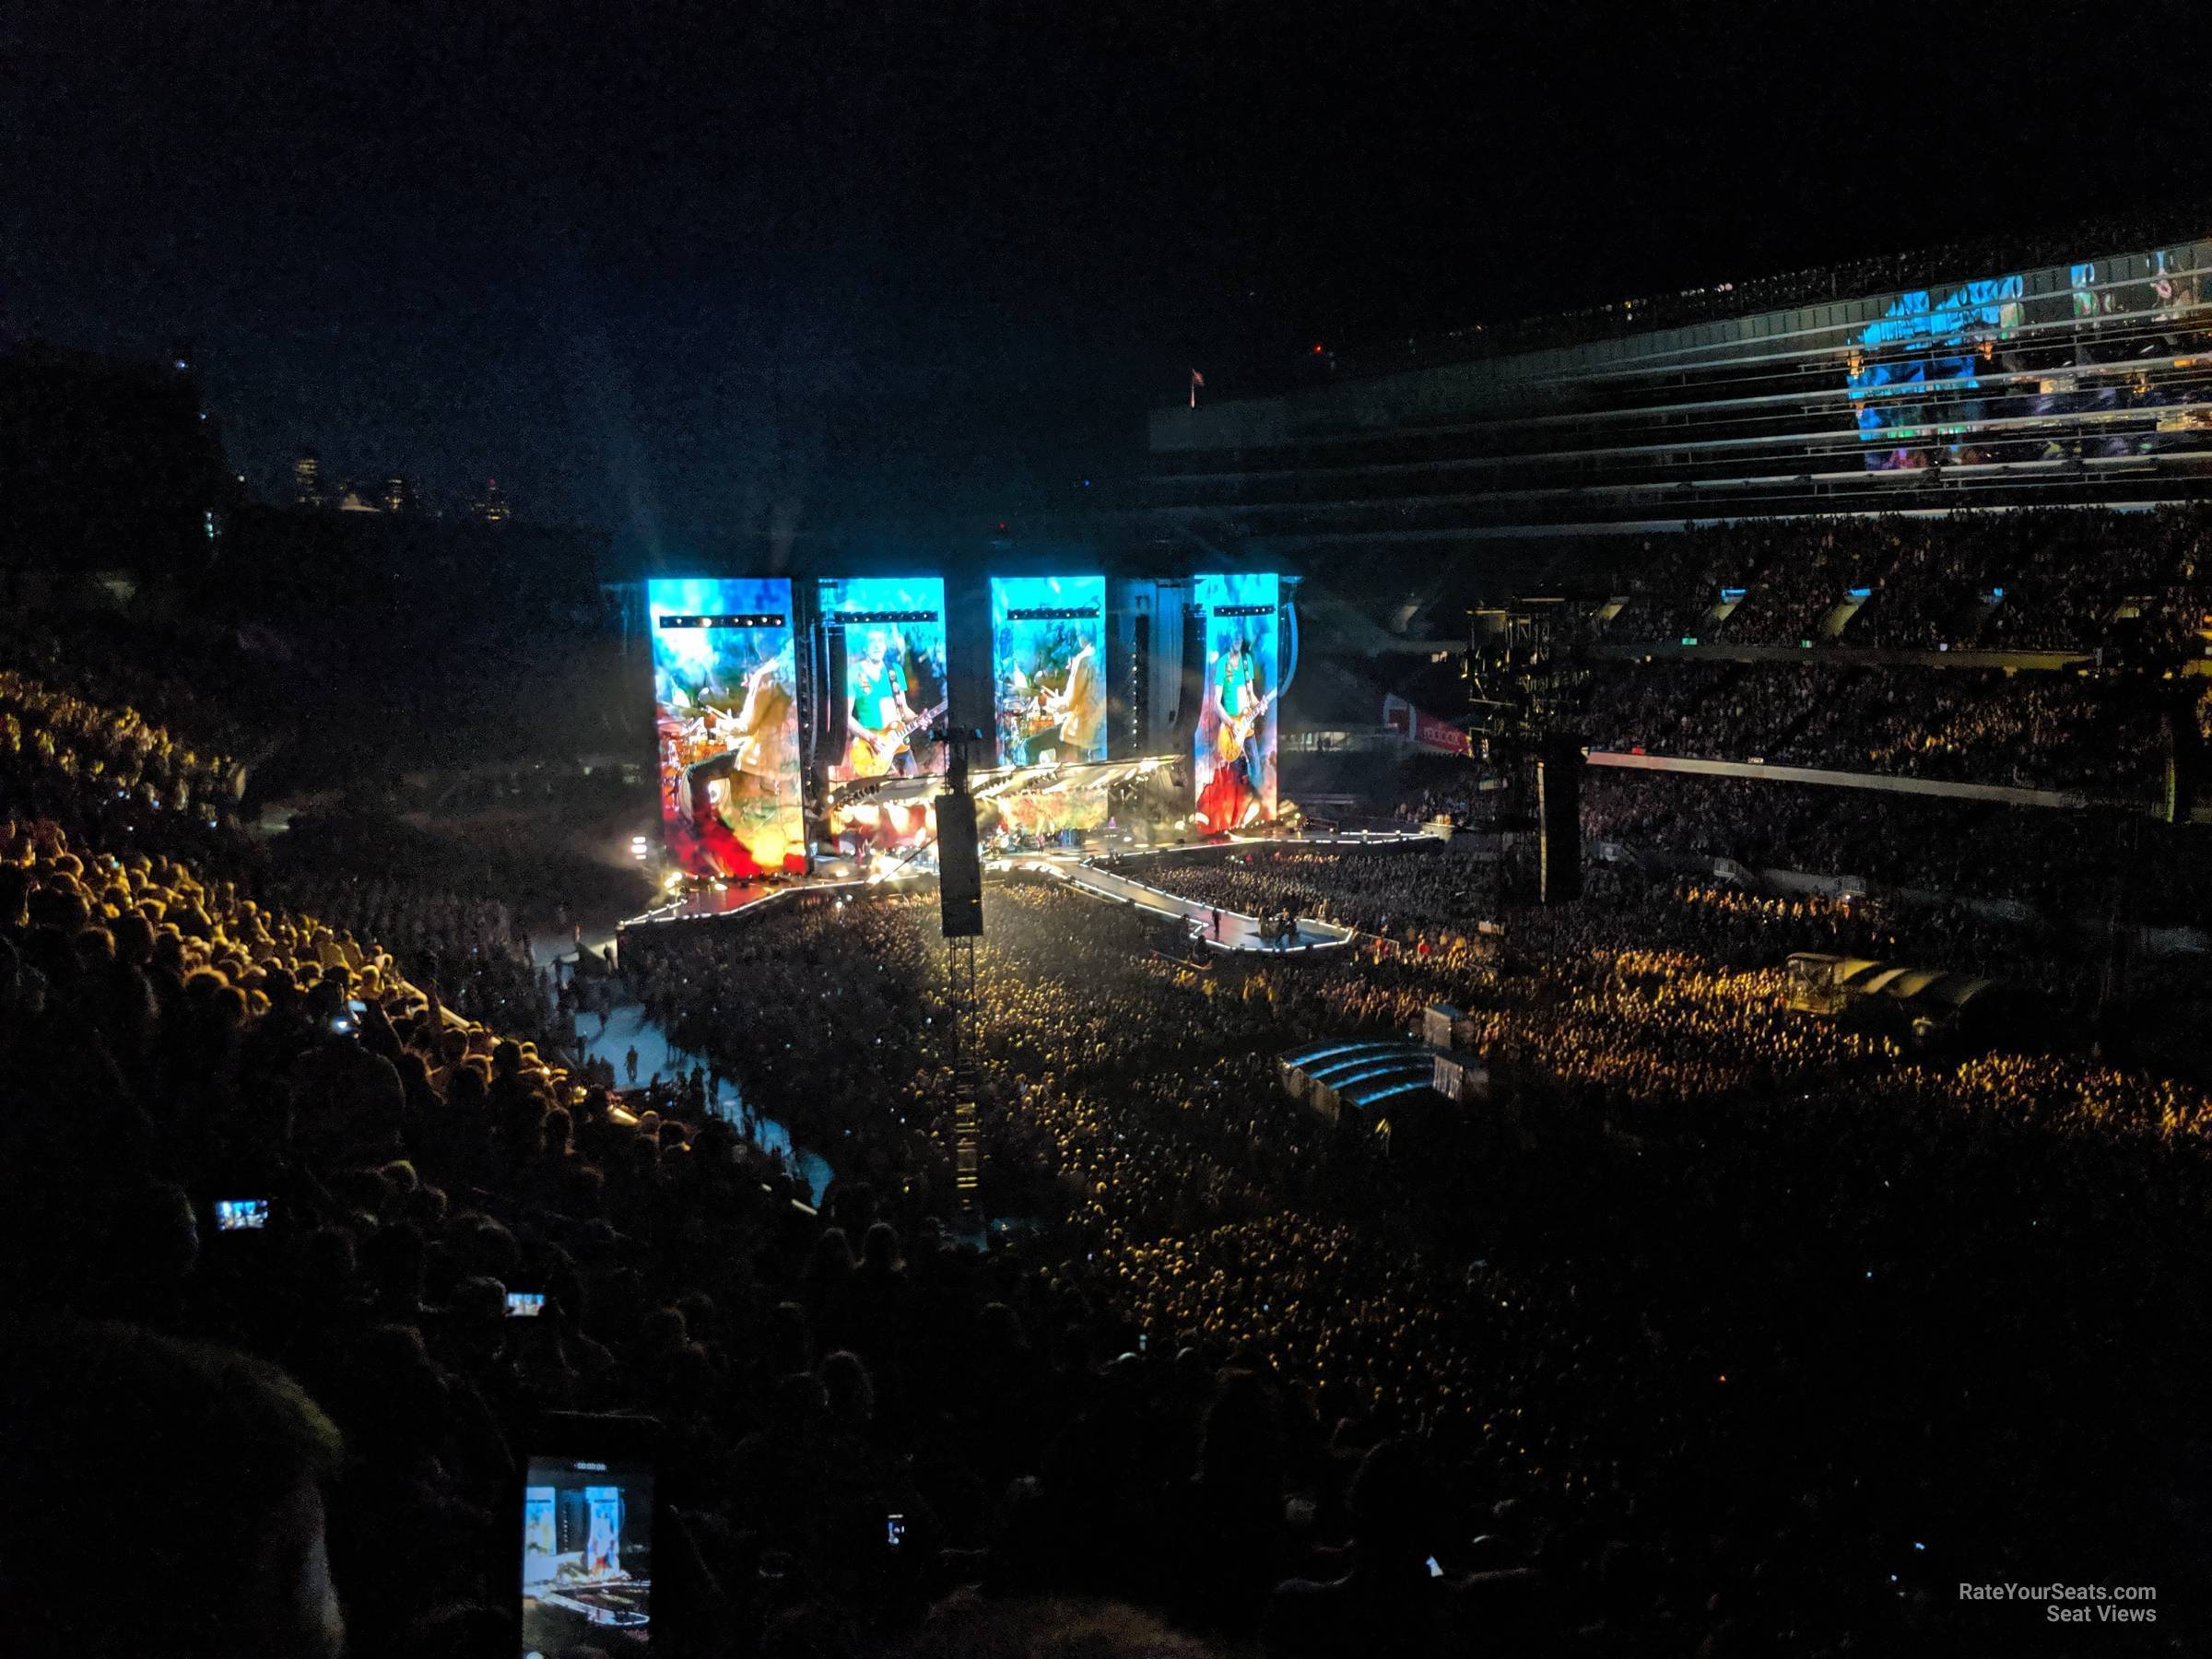 section 331, row 15 seat view  for concert - soldier field